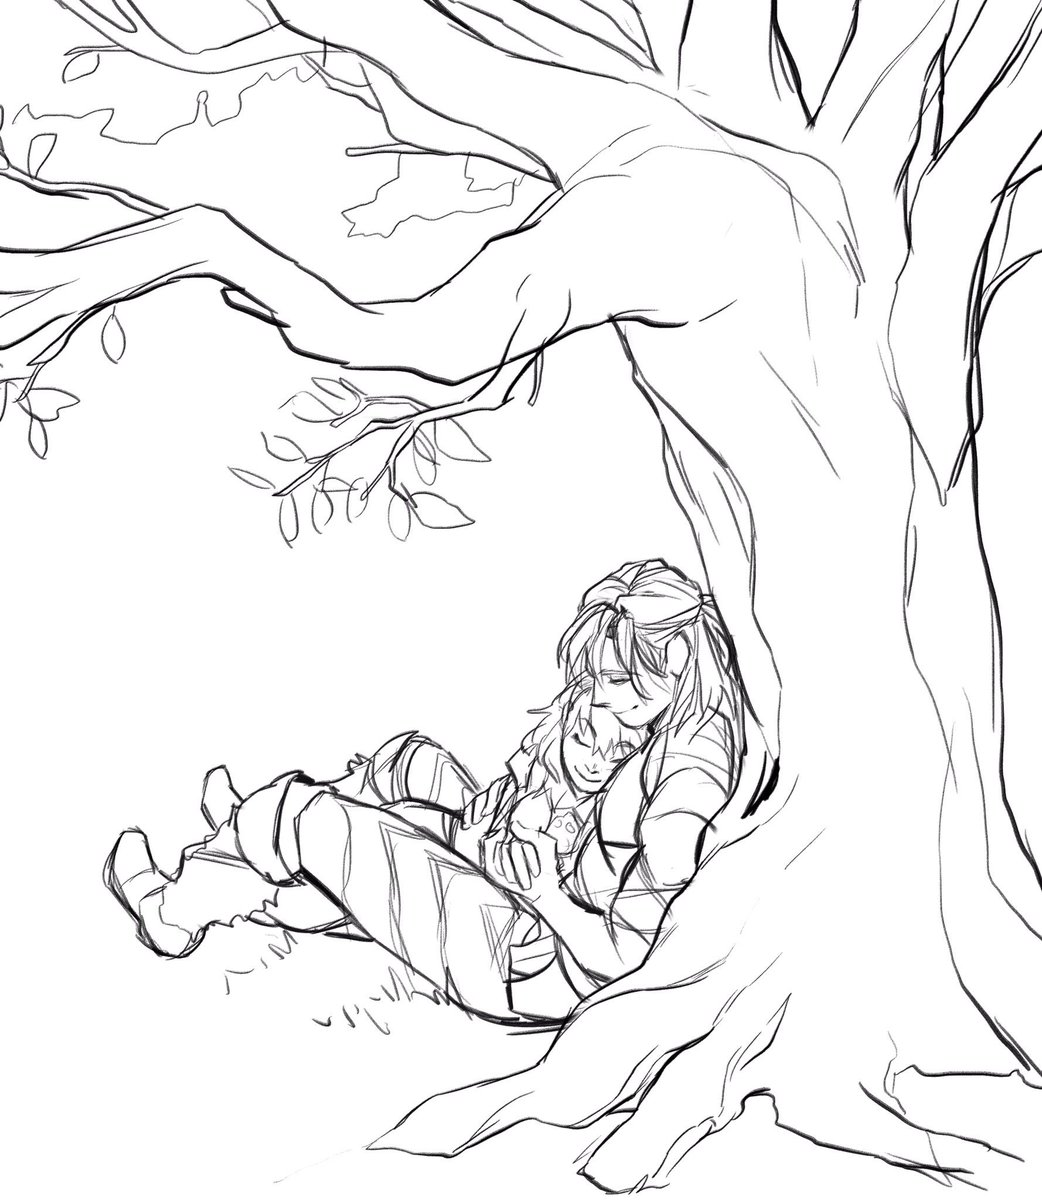 Still wondering how I will do the coloring on this illustration 